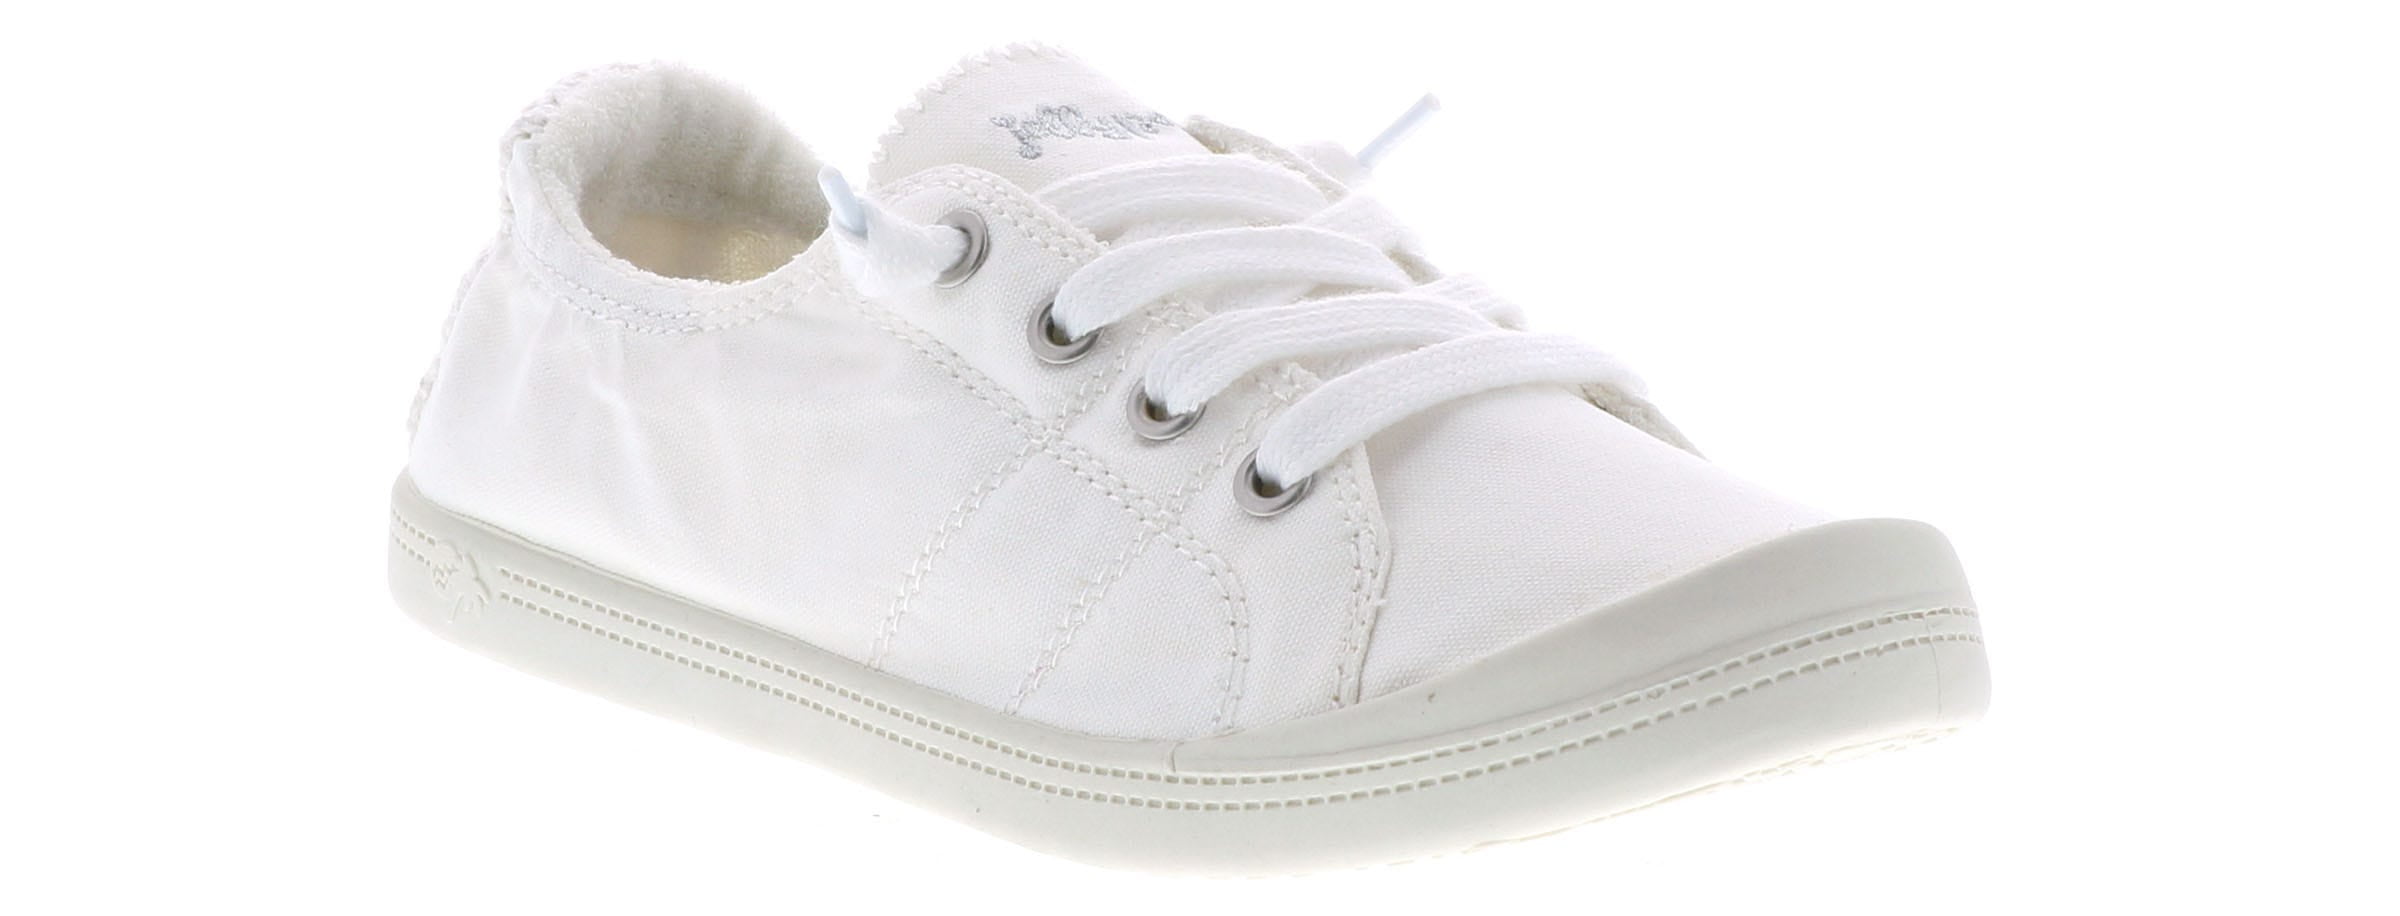 white jellypop shoes